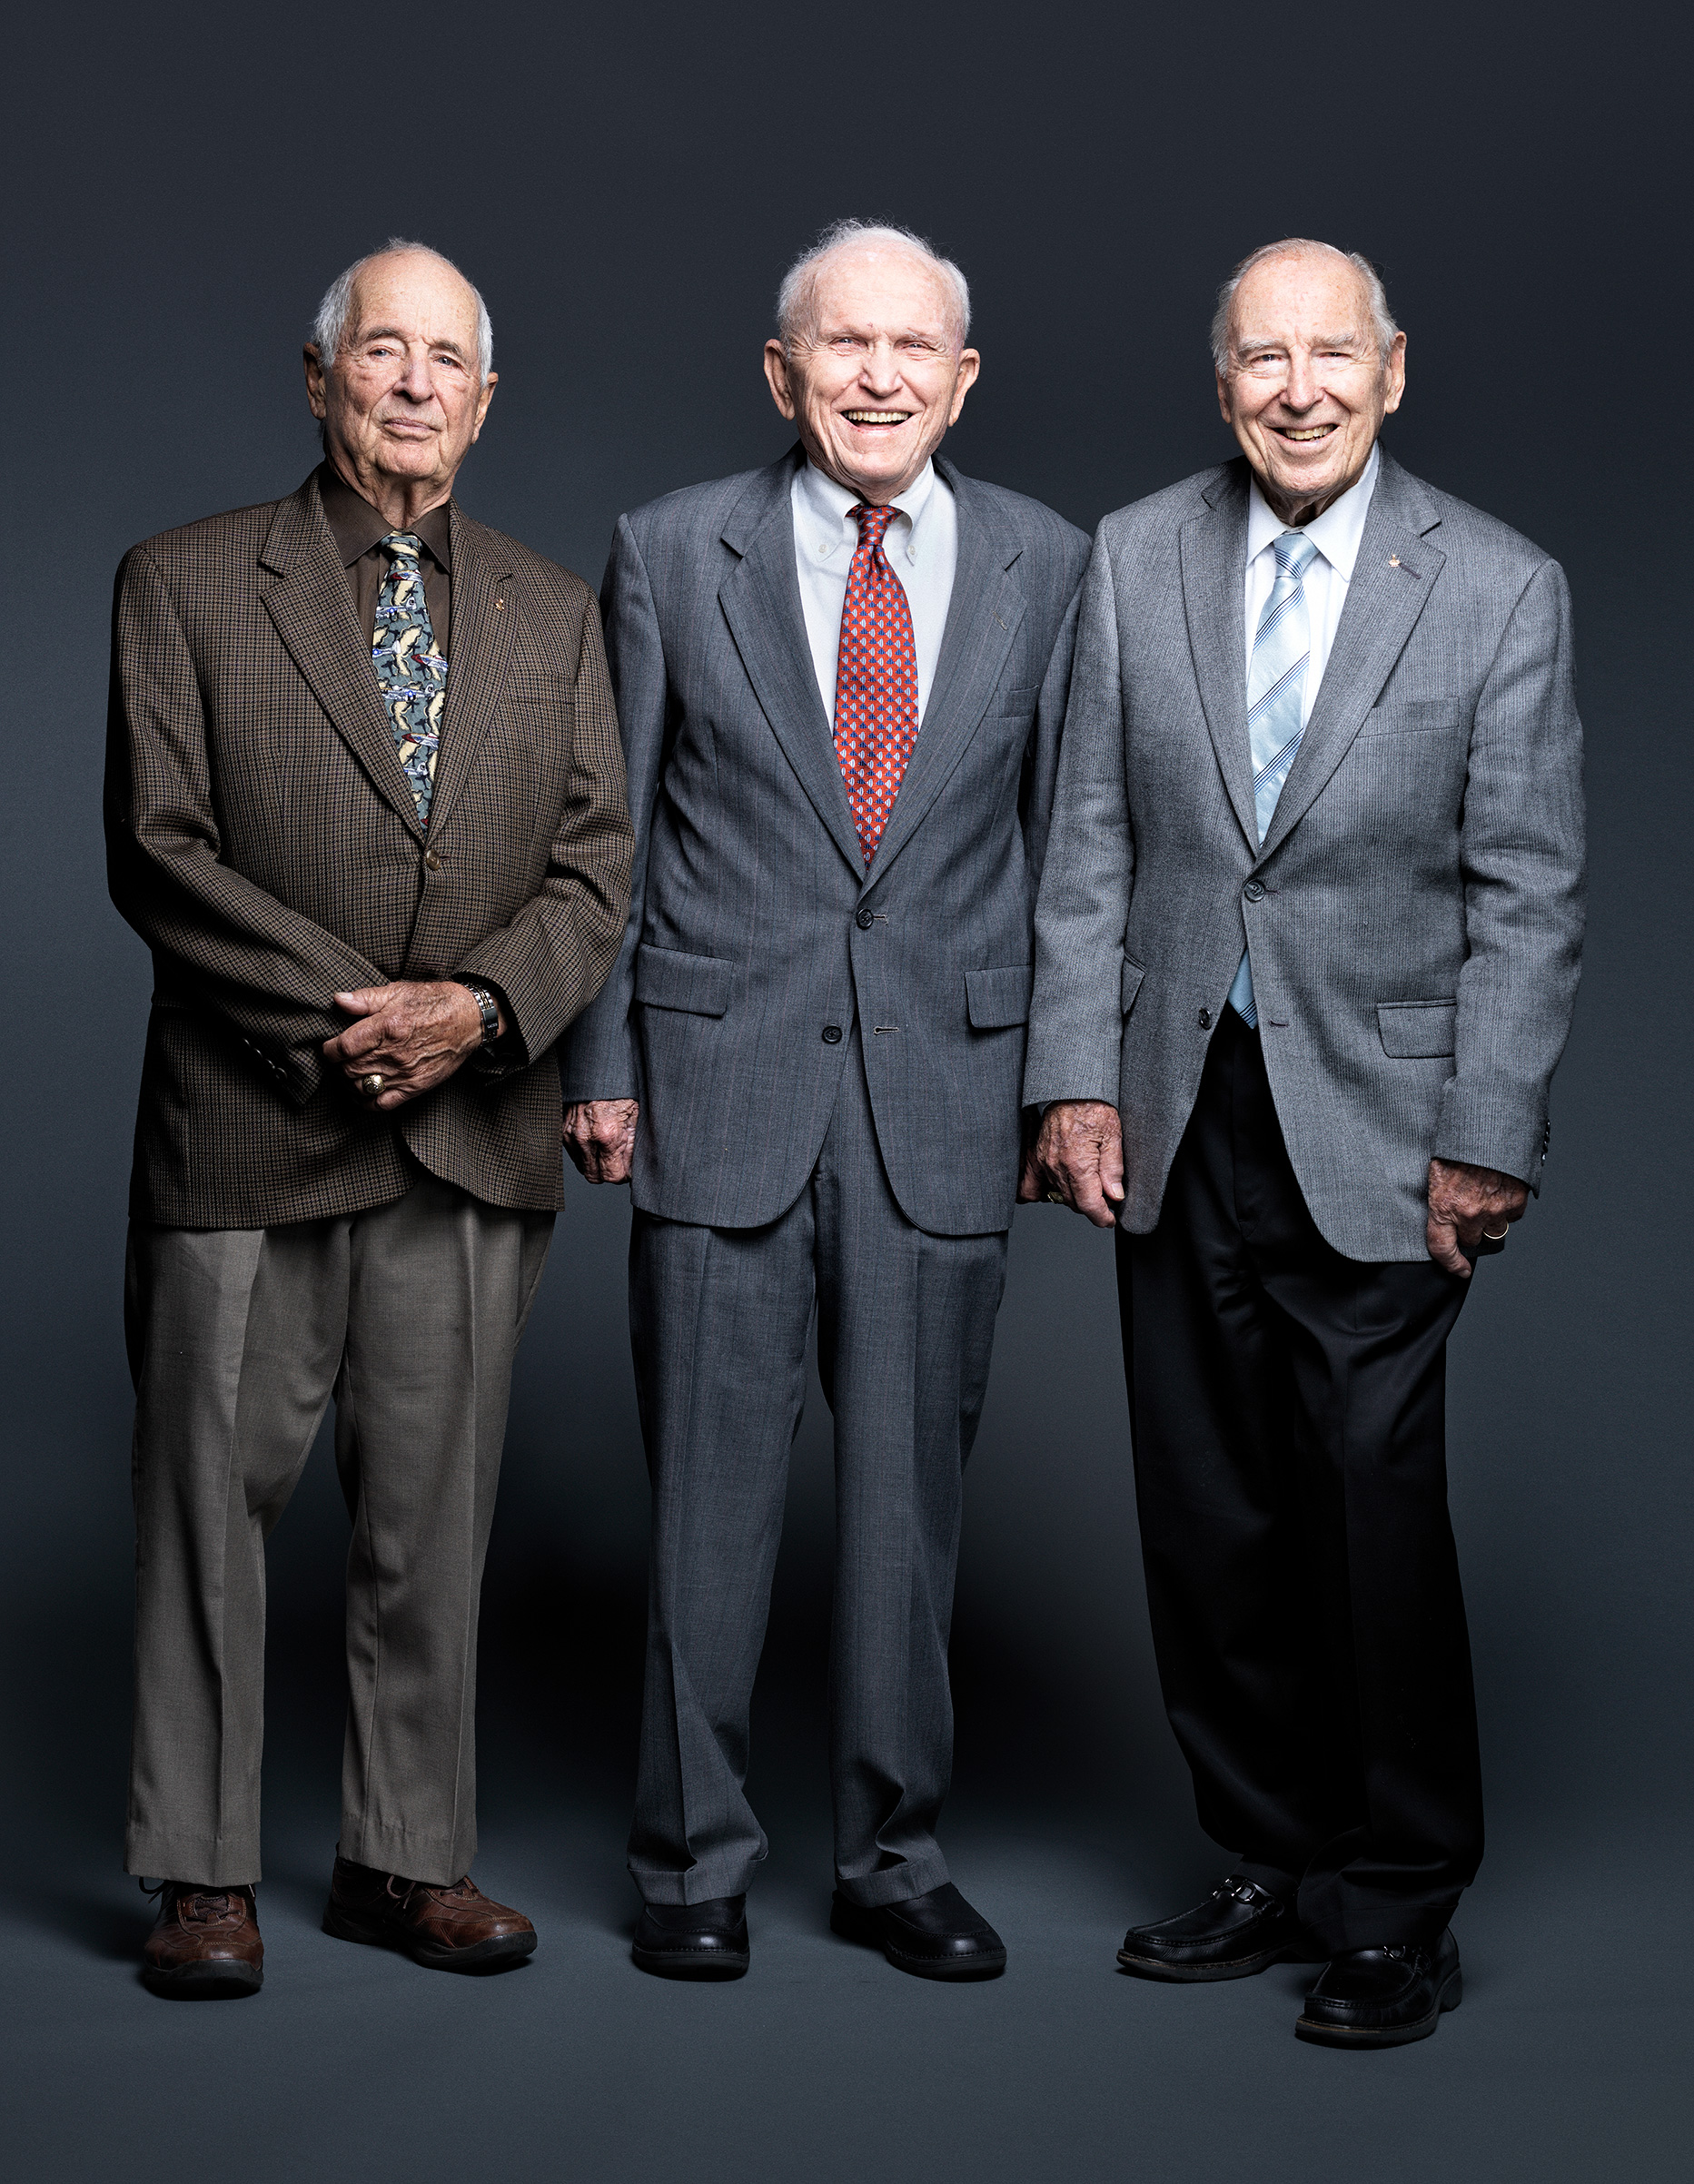 From left: Anders, Borman and Lovell, photographed on Oct. 6, 2018 at the Chicago museum where their Apollo 8 spacecraft is displayed (Marco Grob for TIME)